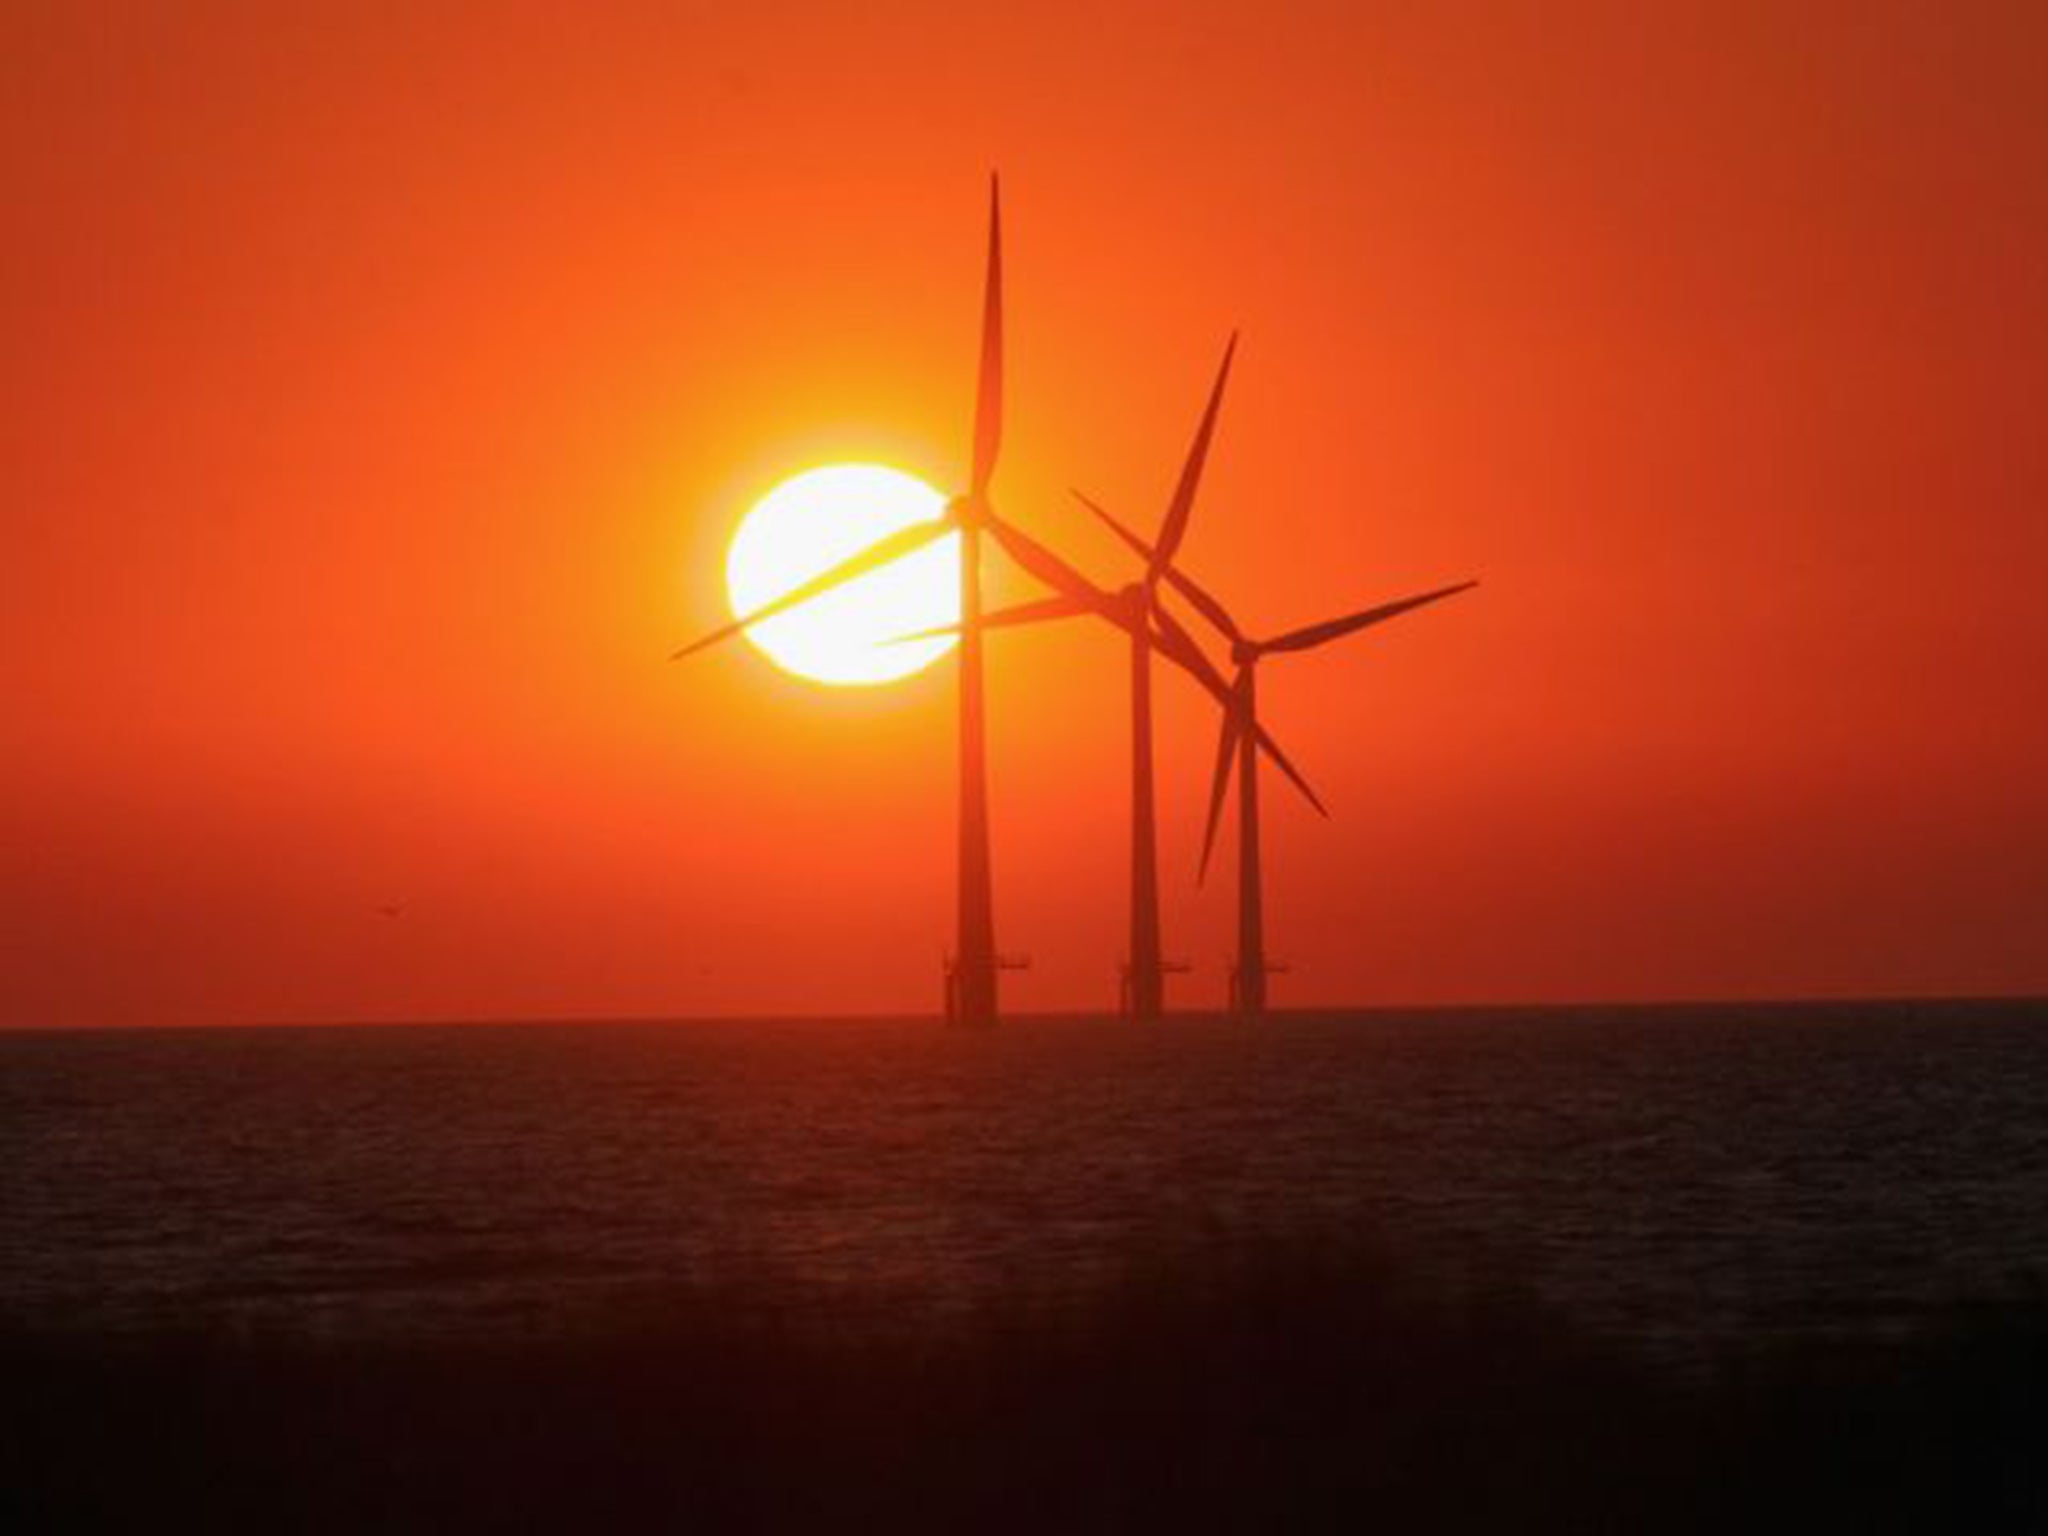 The Dogger Bank wind farm will comprise up to 800 turbines